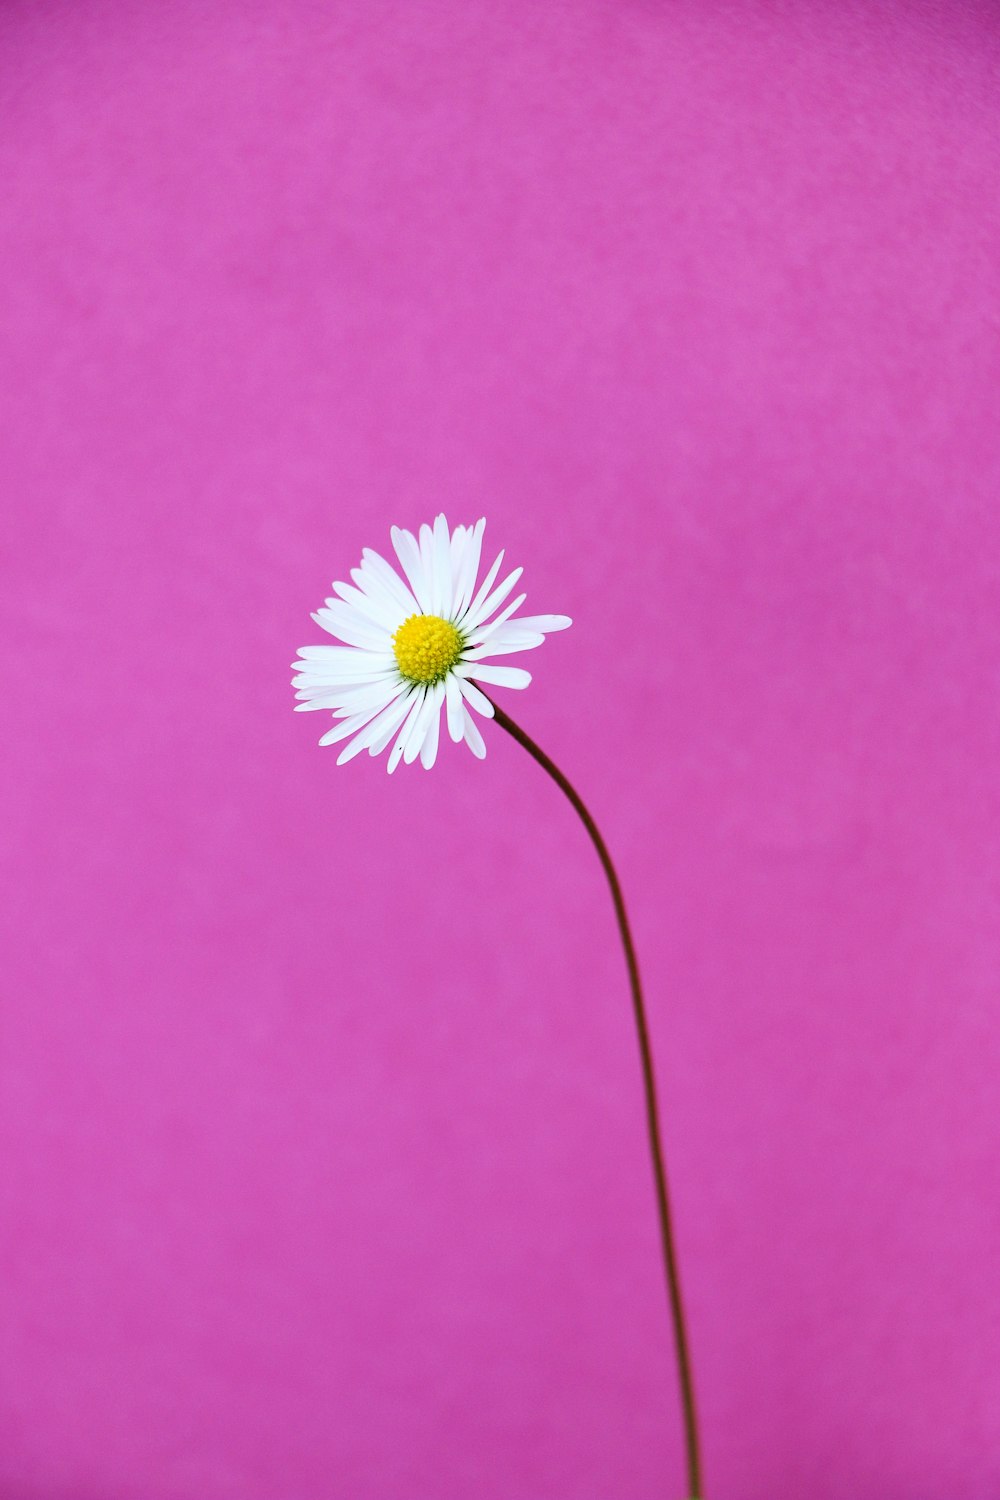 white daisy on pink background